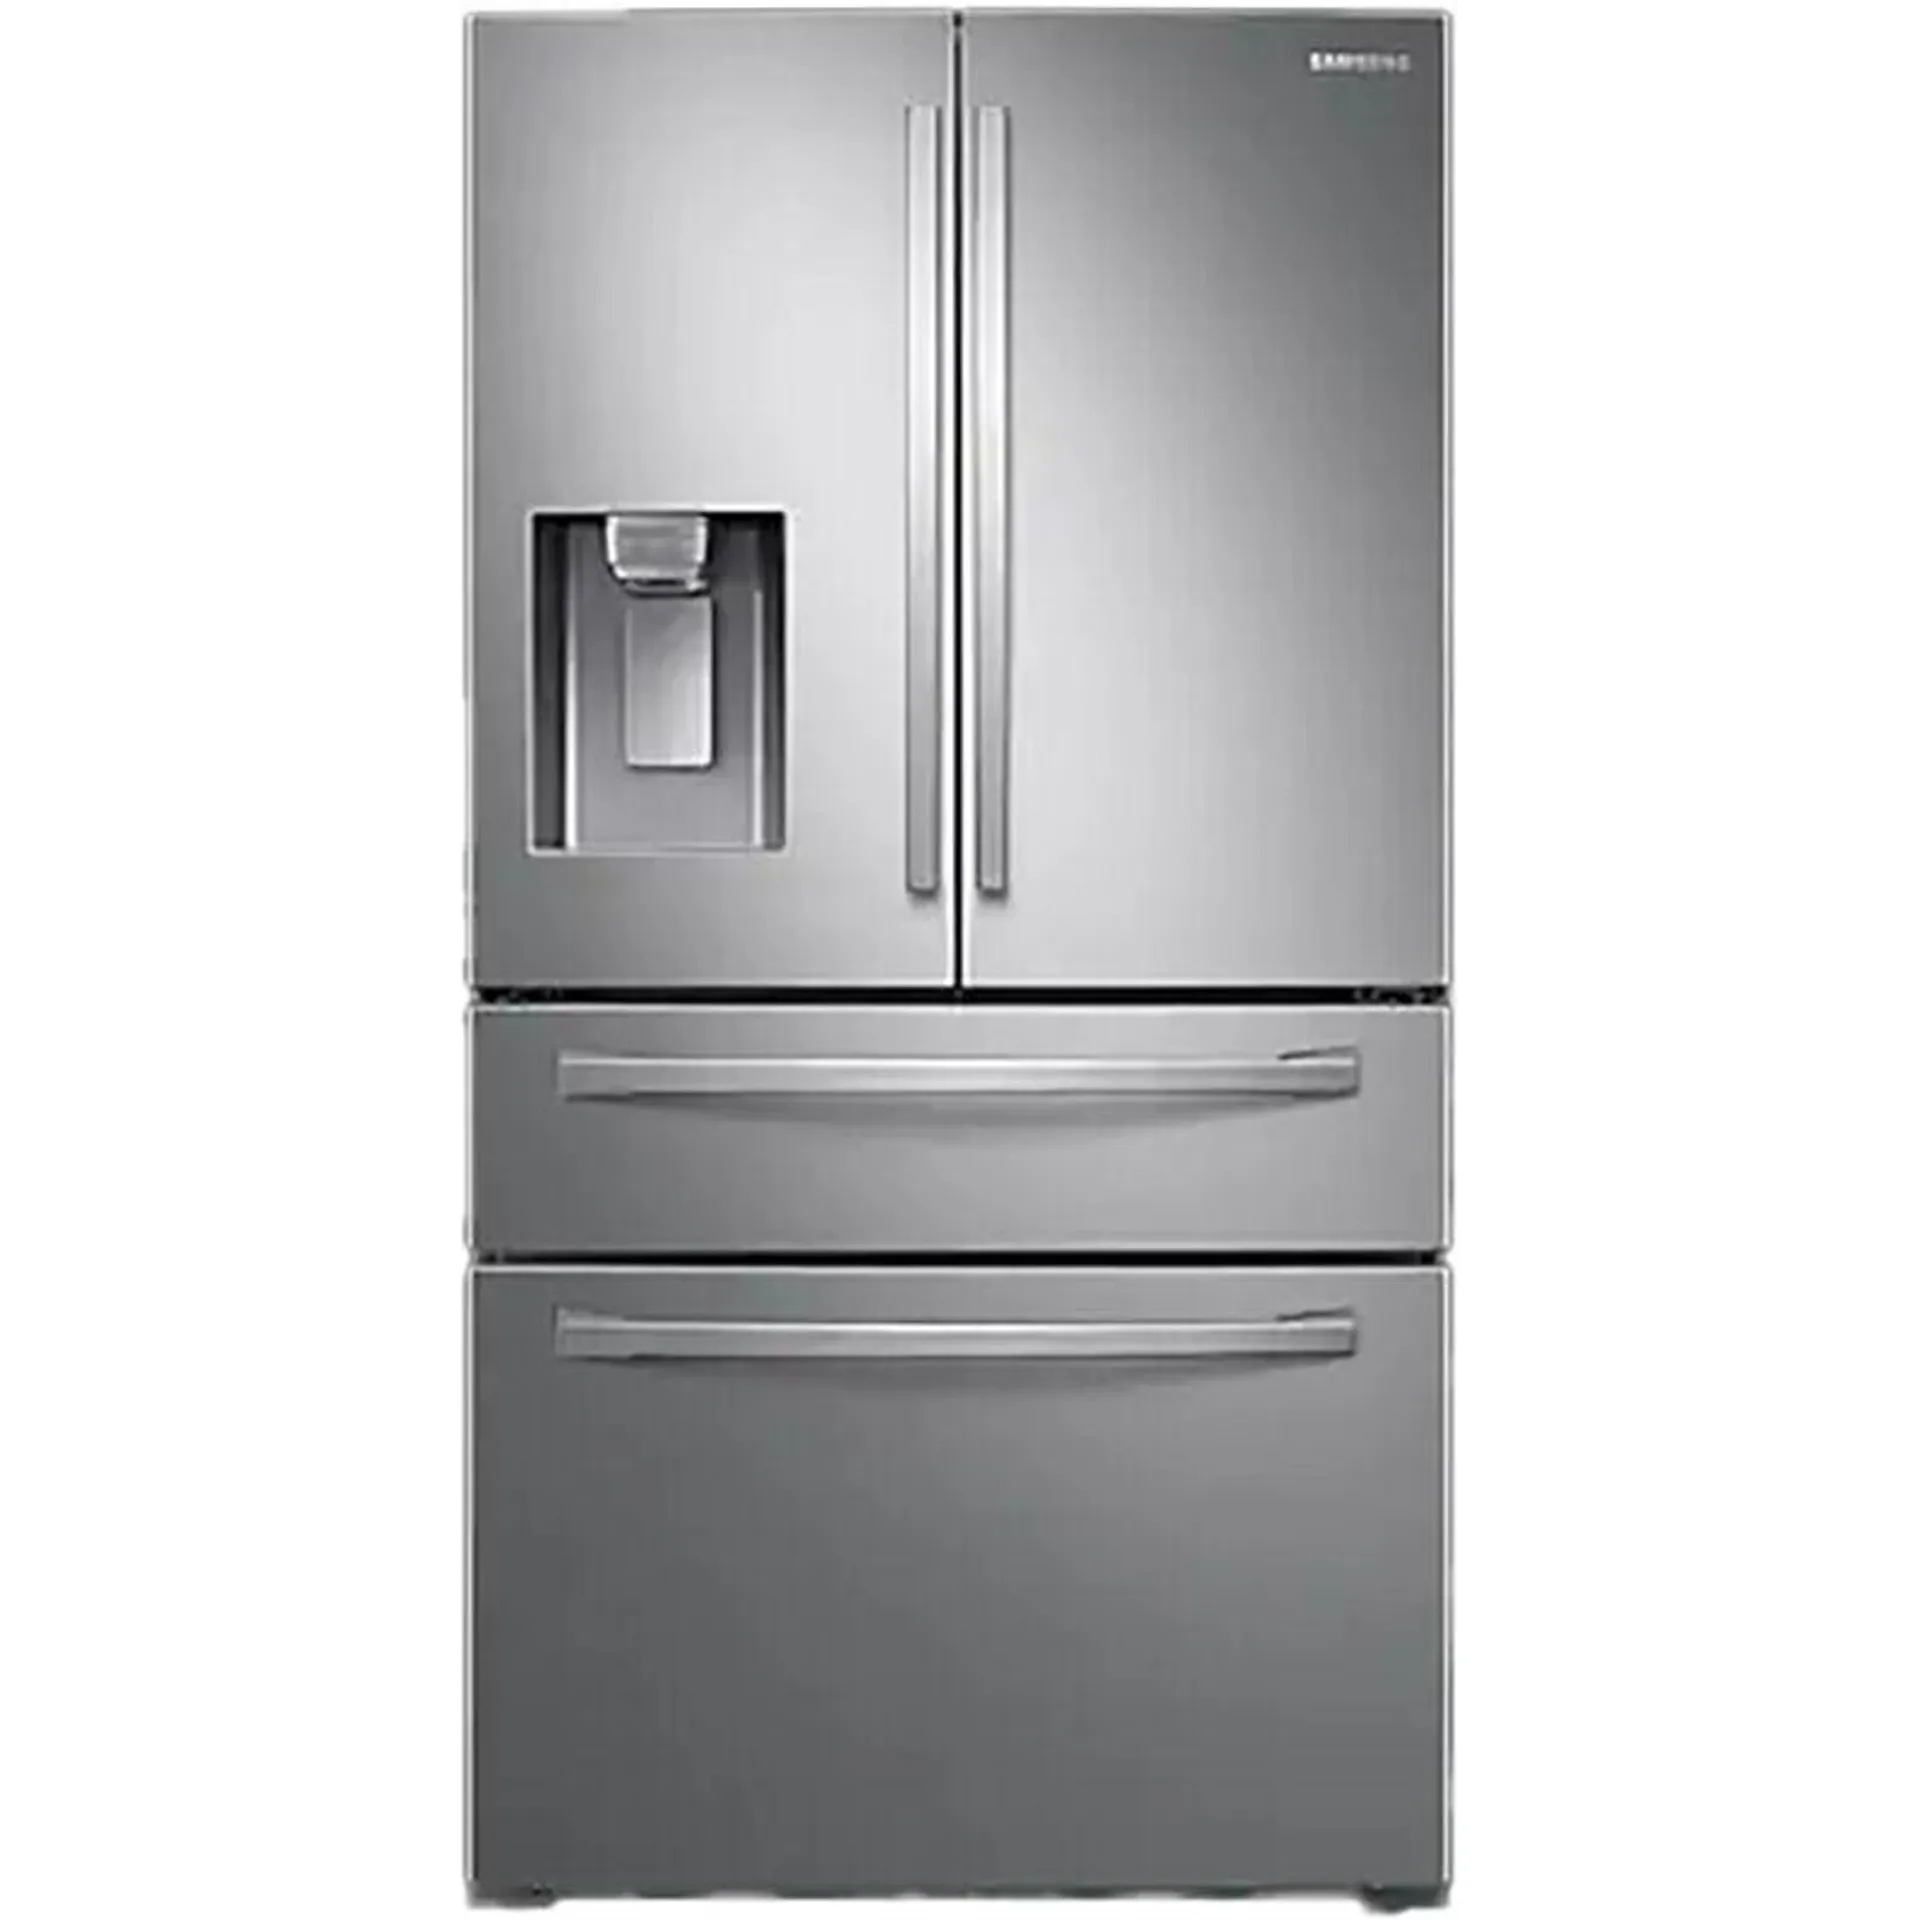 Samsung 36 in. 22.6 cu. ft. Smart Counter Depth French Door Refrigerator with External Ice & Water Dispenser - Stainless Steel